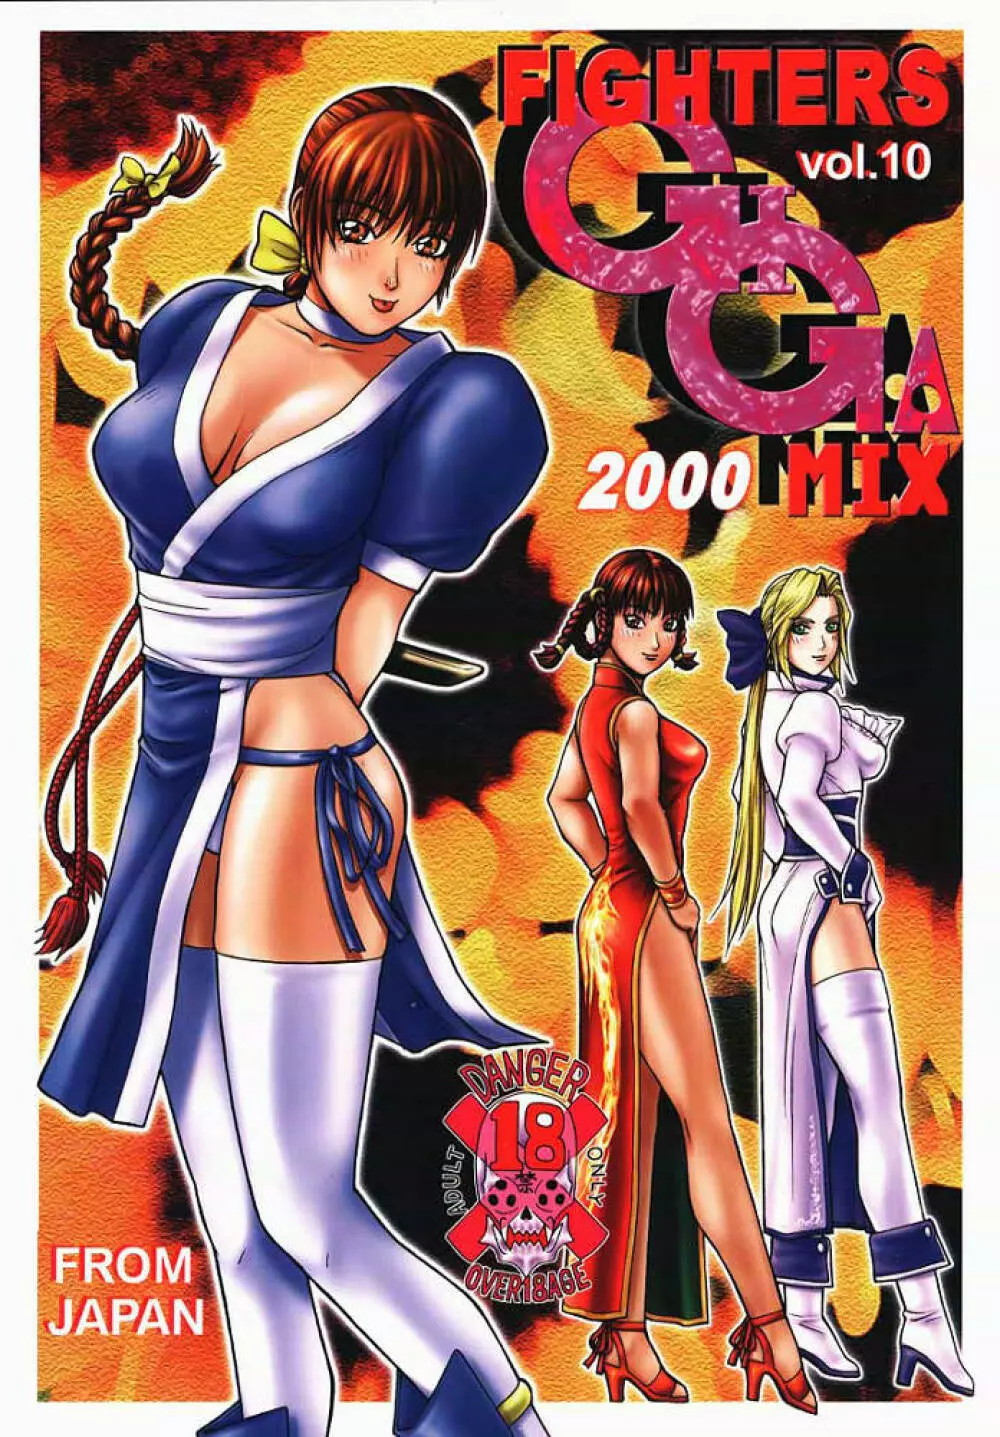 FIGHTERS GIGAMIX 2000 FGM Vol.10